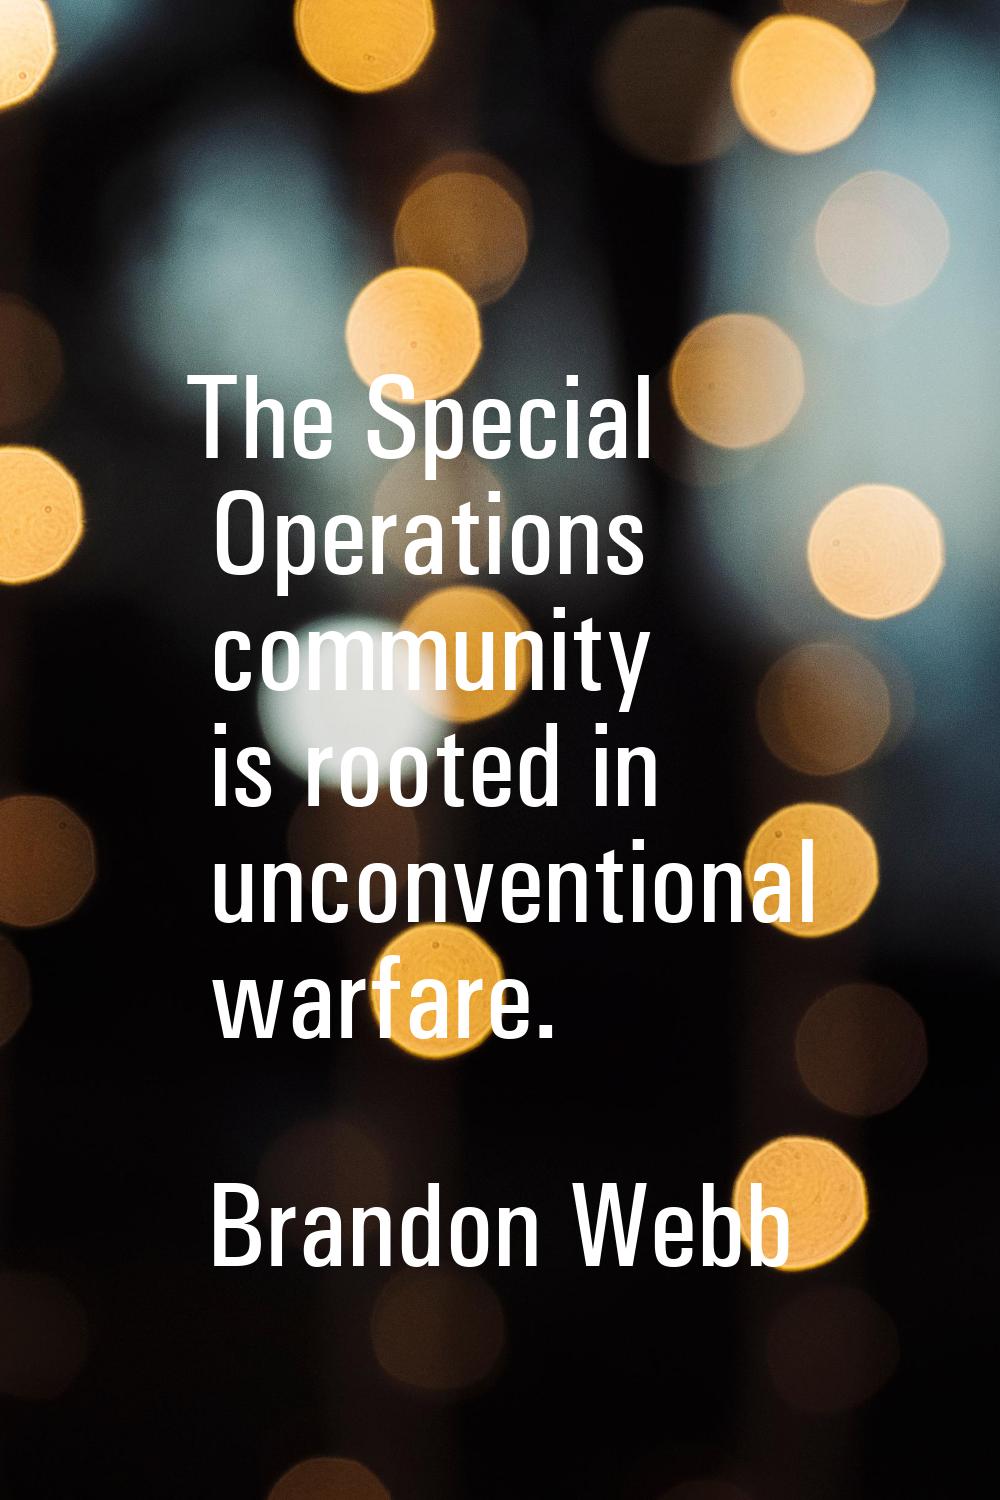 The Special Operations community is rooted in unconventional warfare.